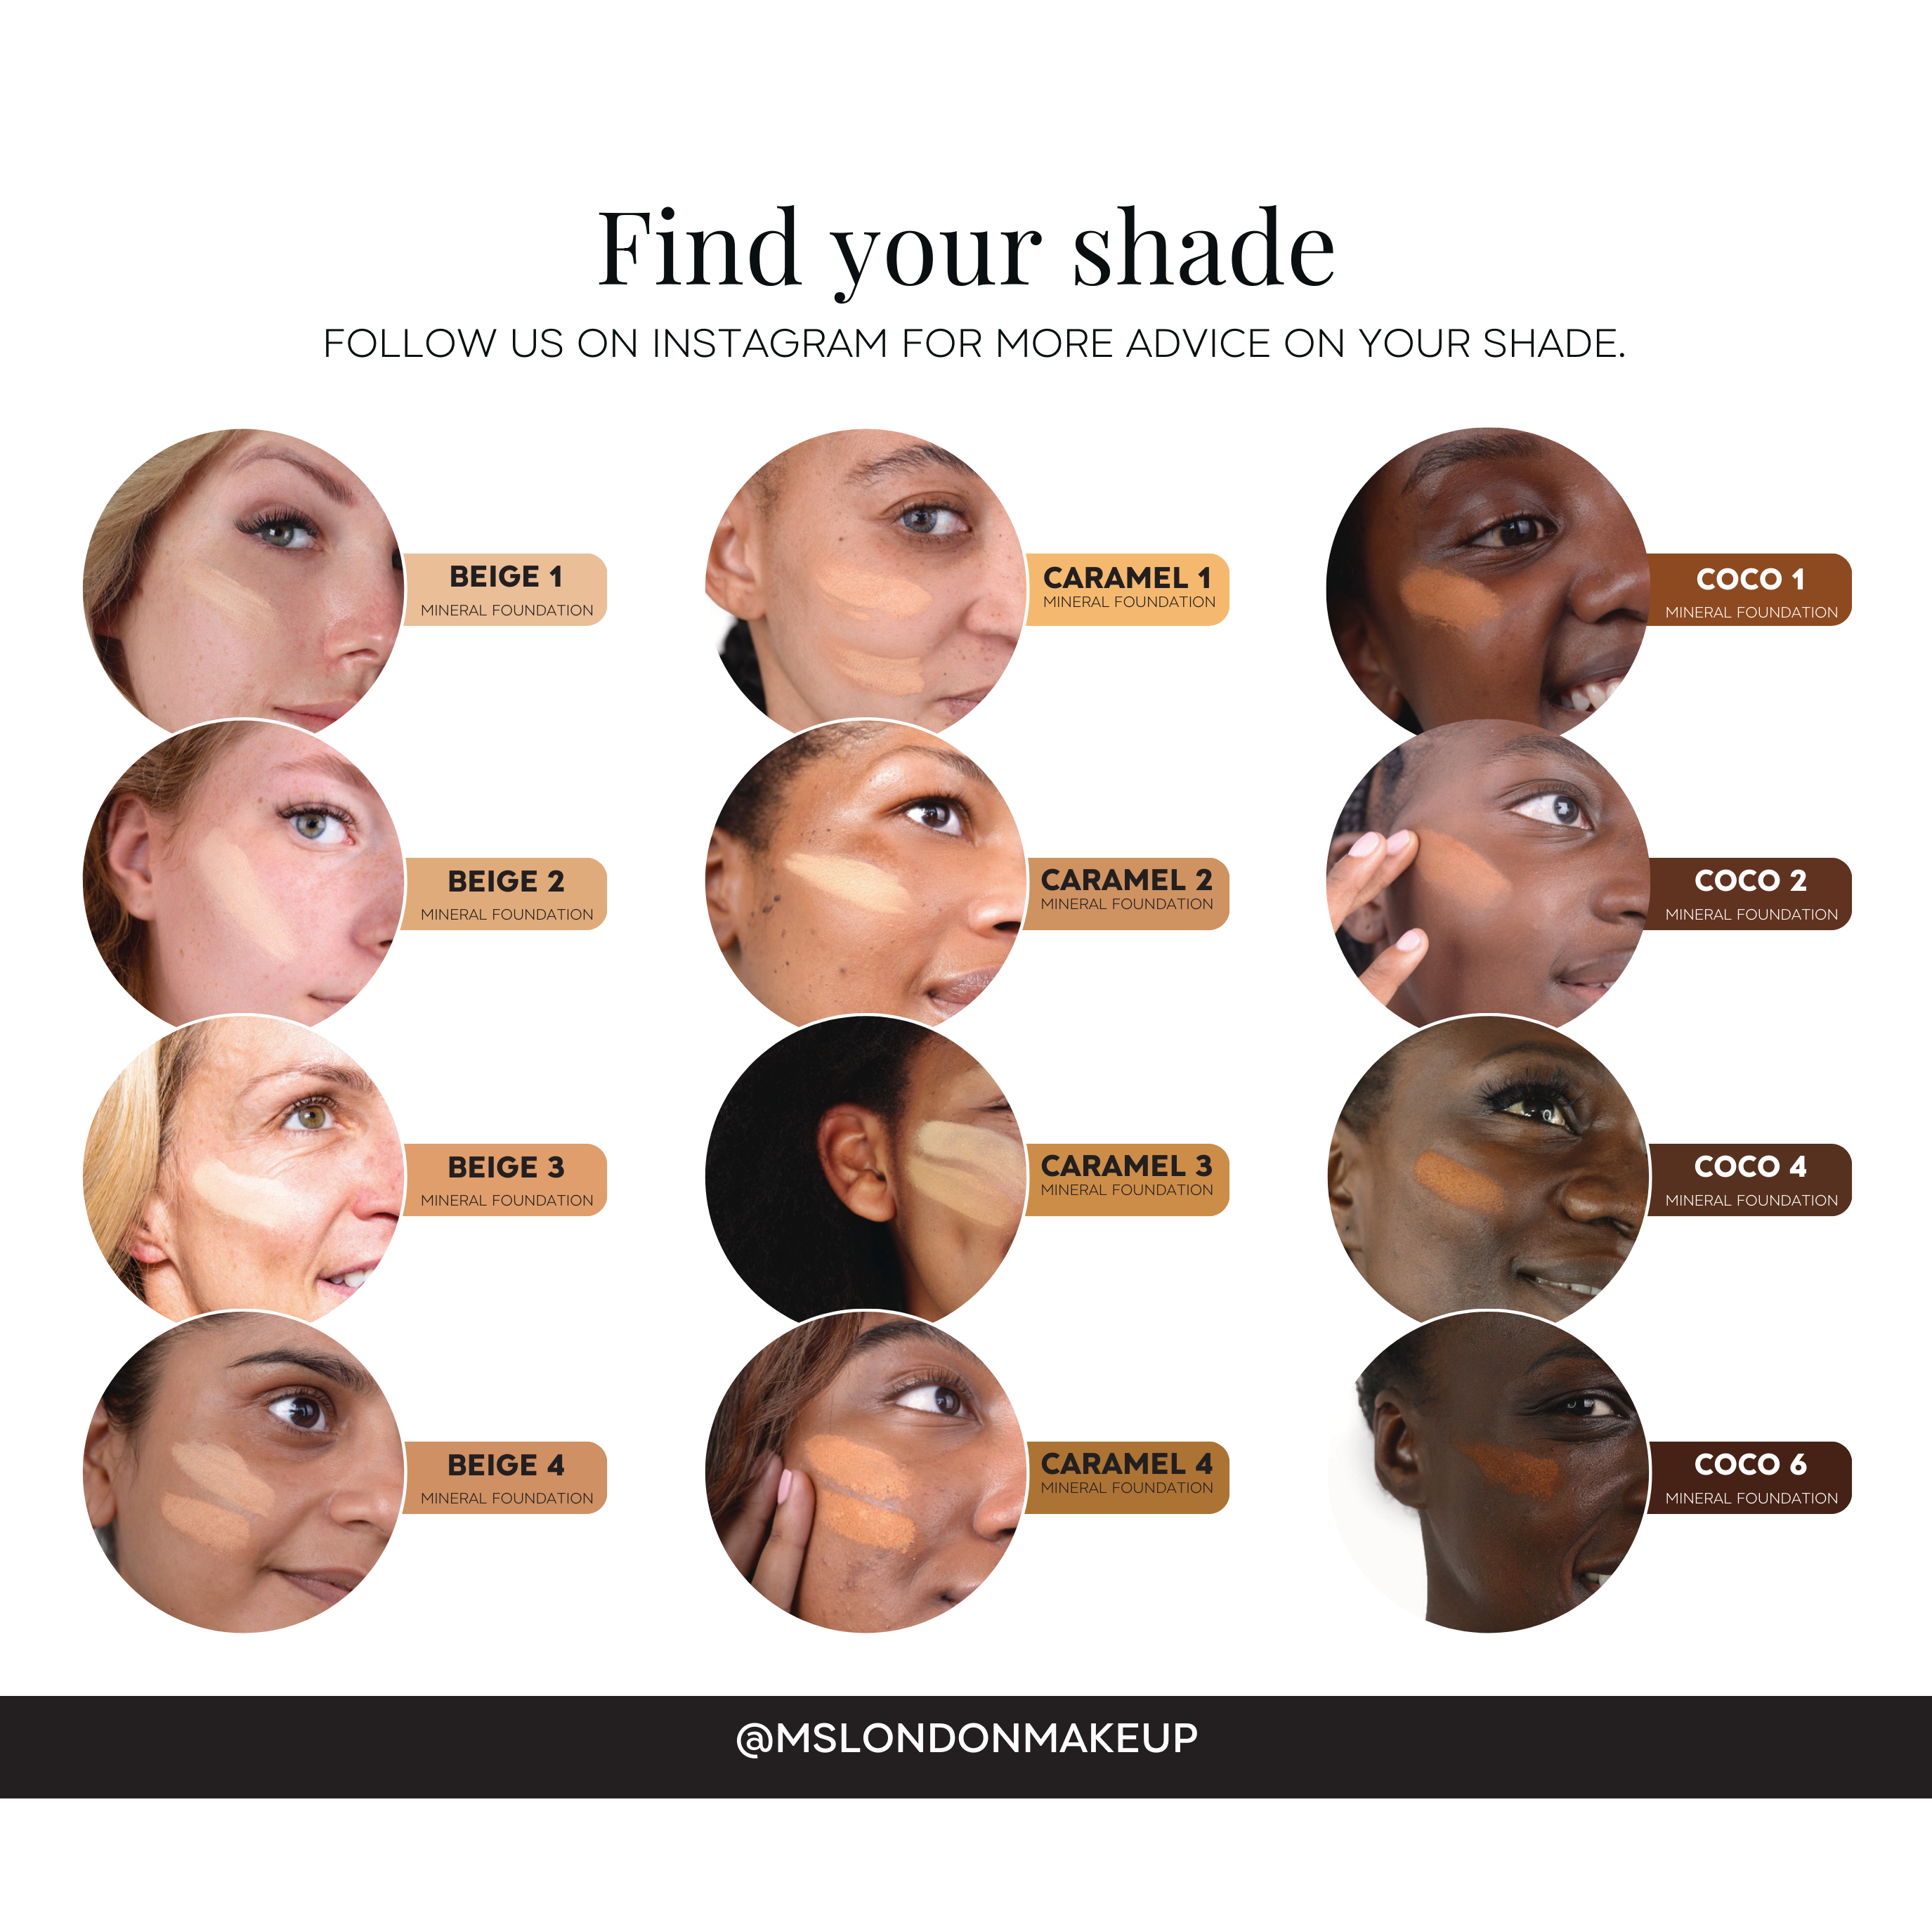 We are LIVE to help you find your shade